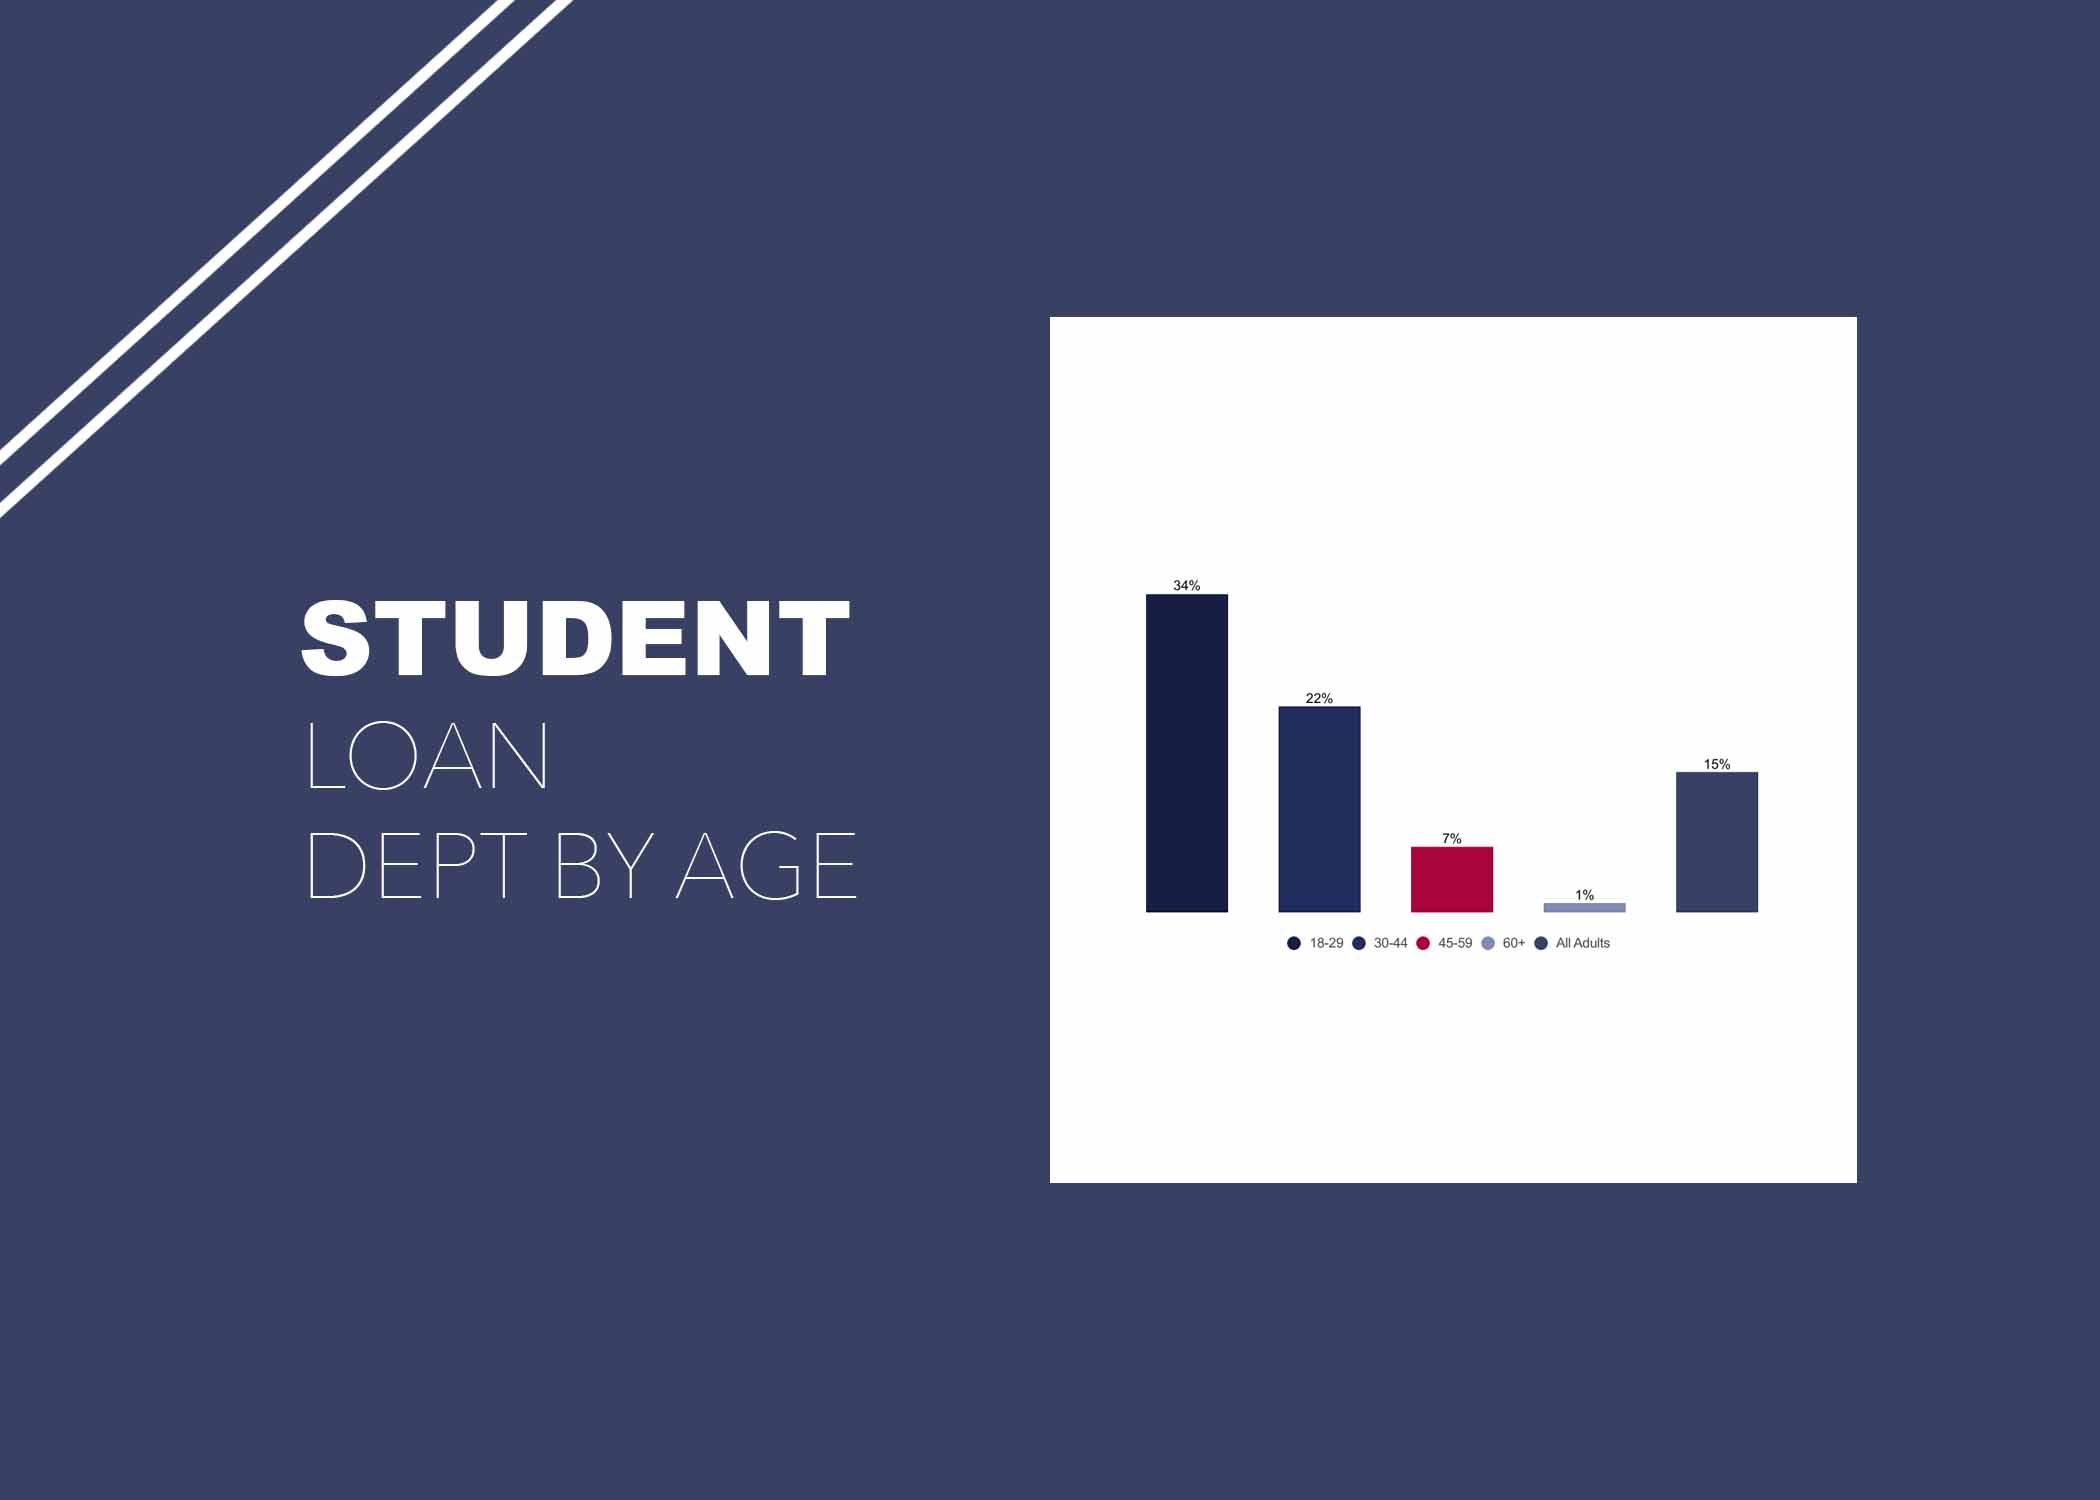 Student Loan Debt by Age